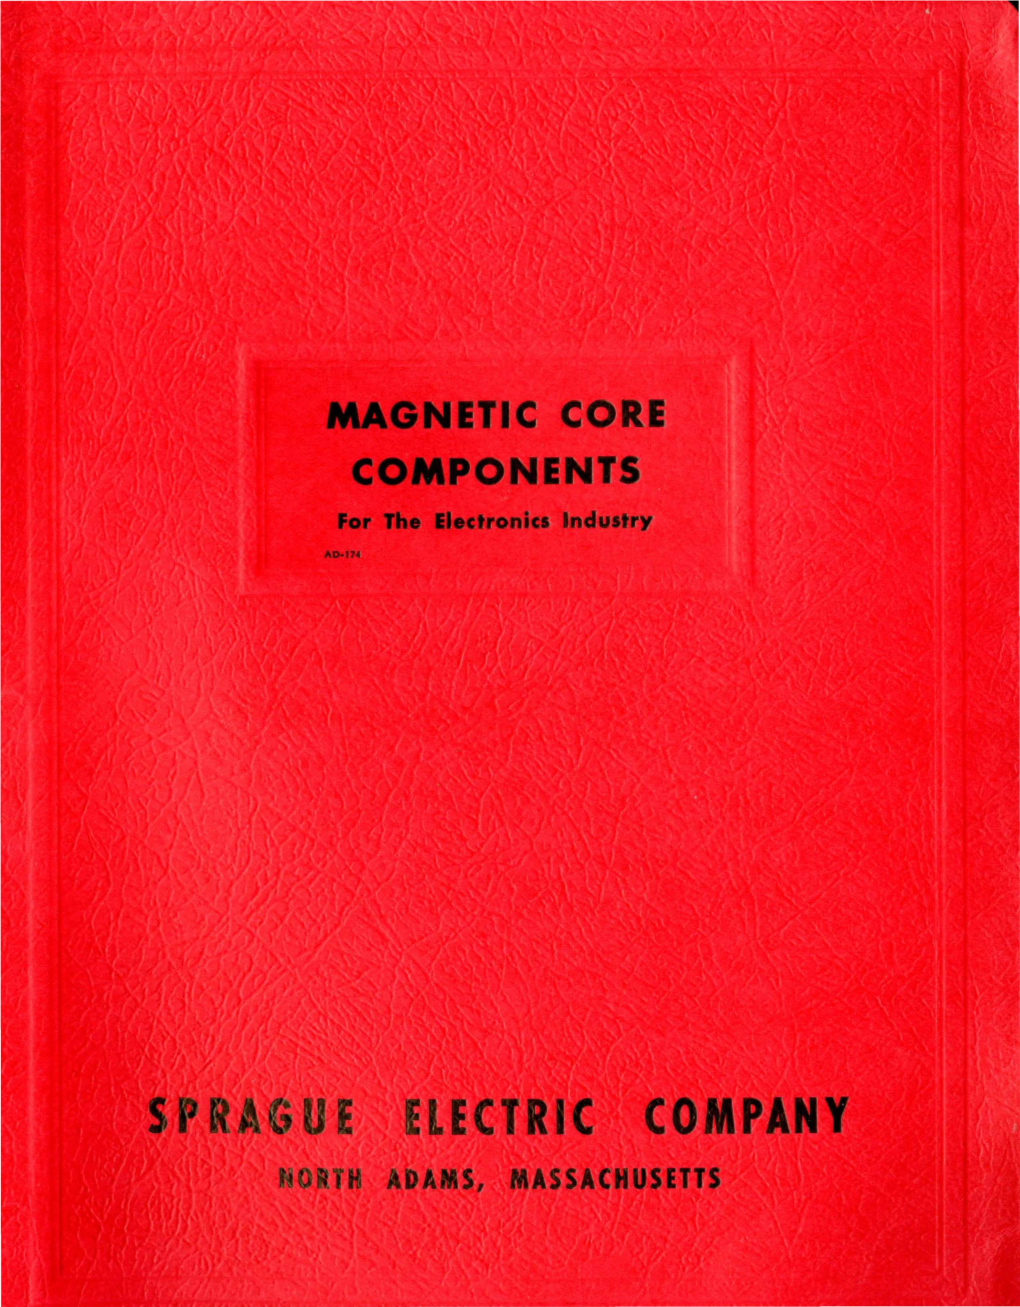 MAGNETIC CORE, COMPONENTS for the Electronics Industry